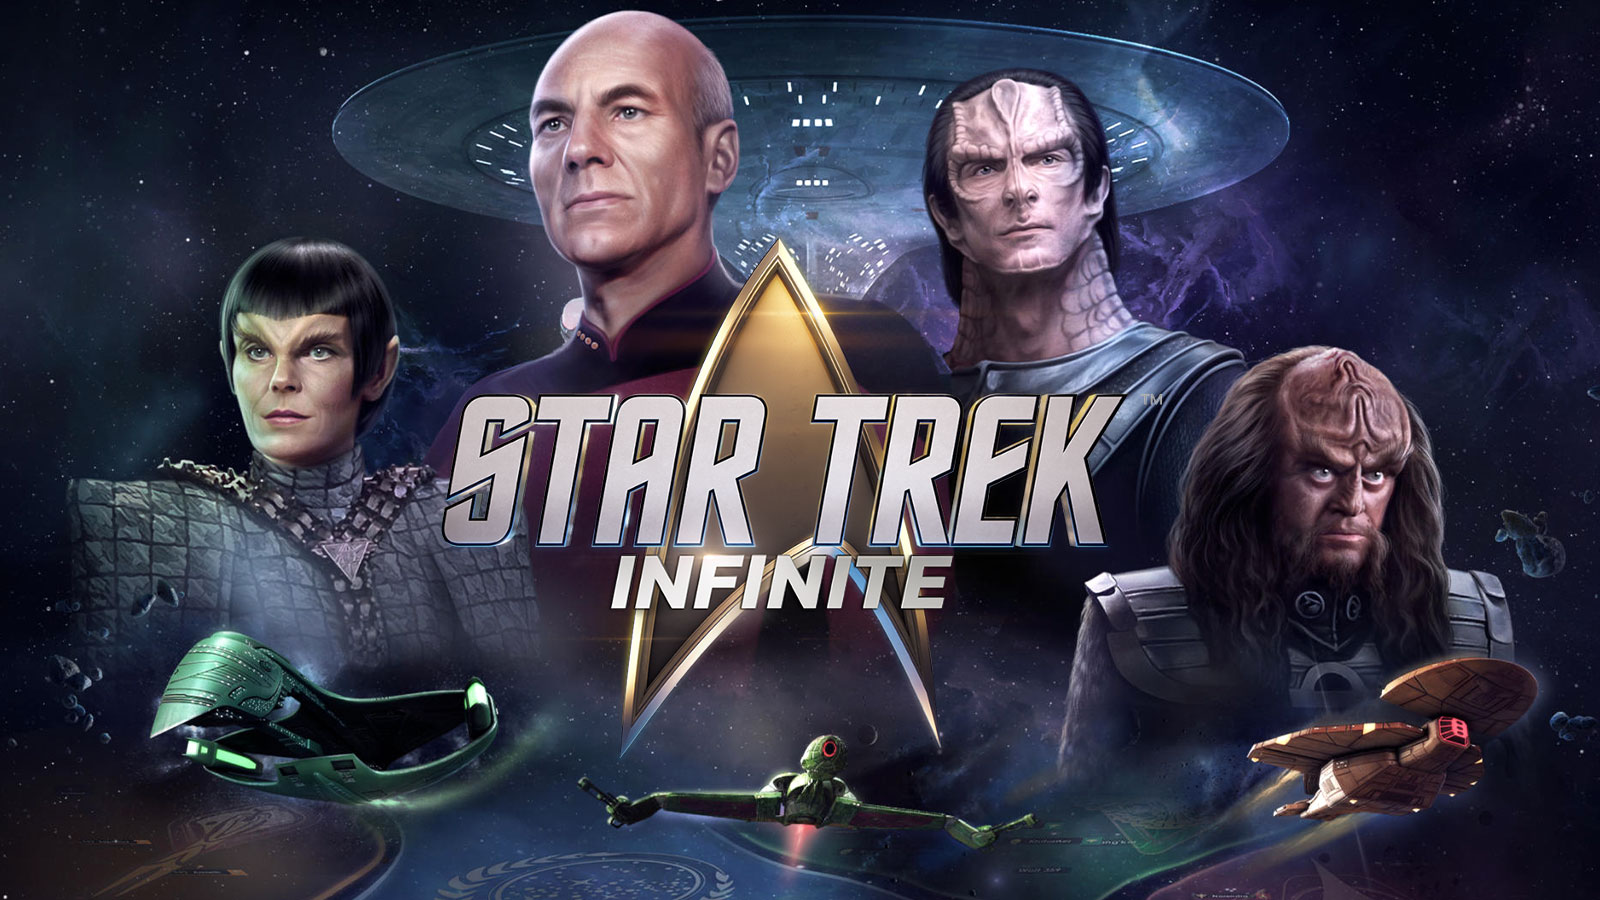 ‘Star Trek: Infinite’ strategy game revealed, set to be released this fall